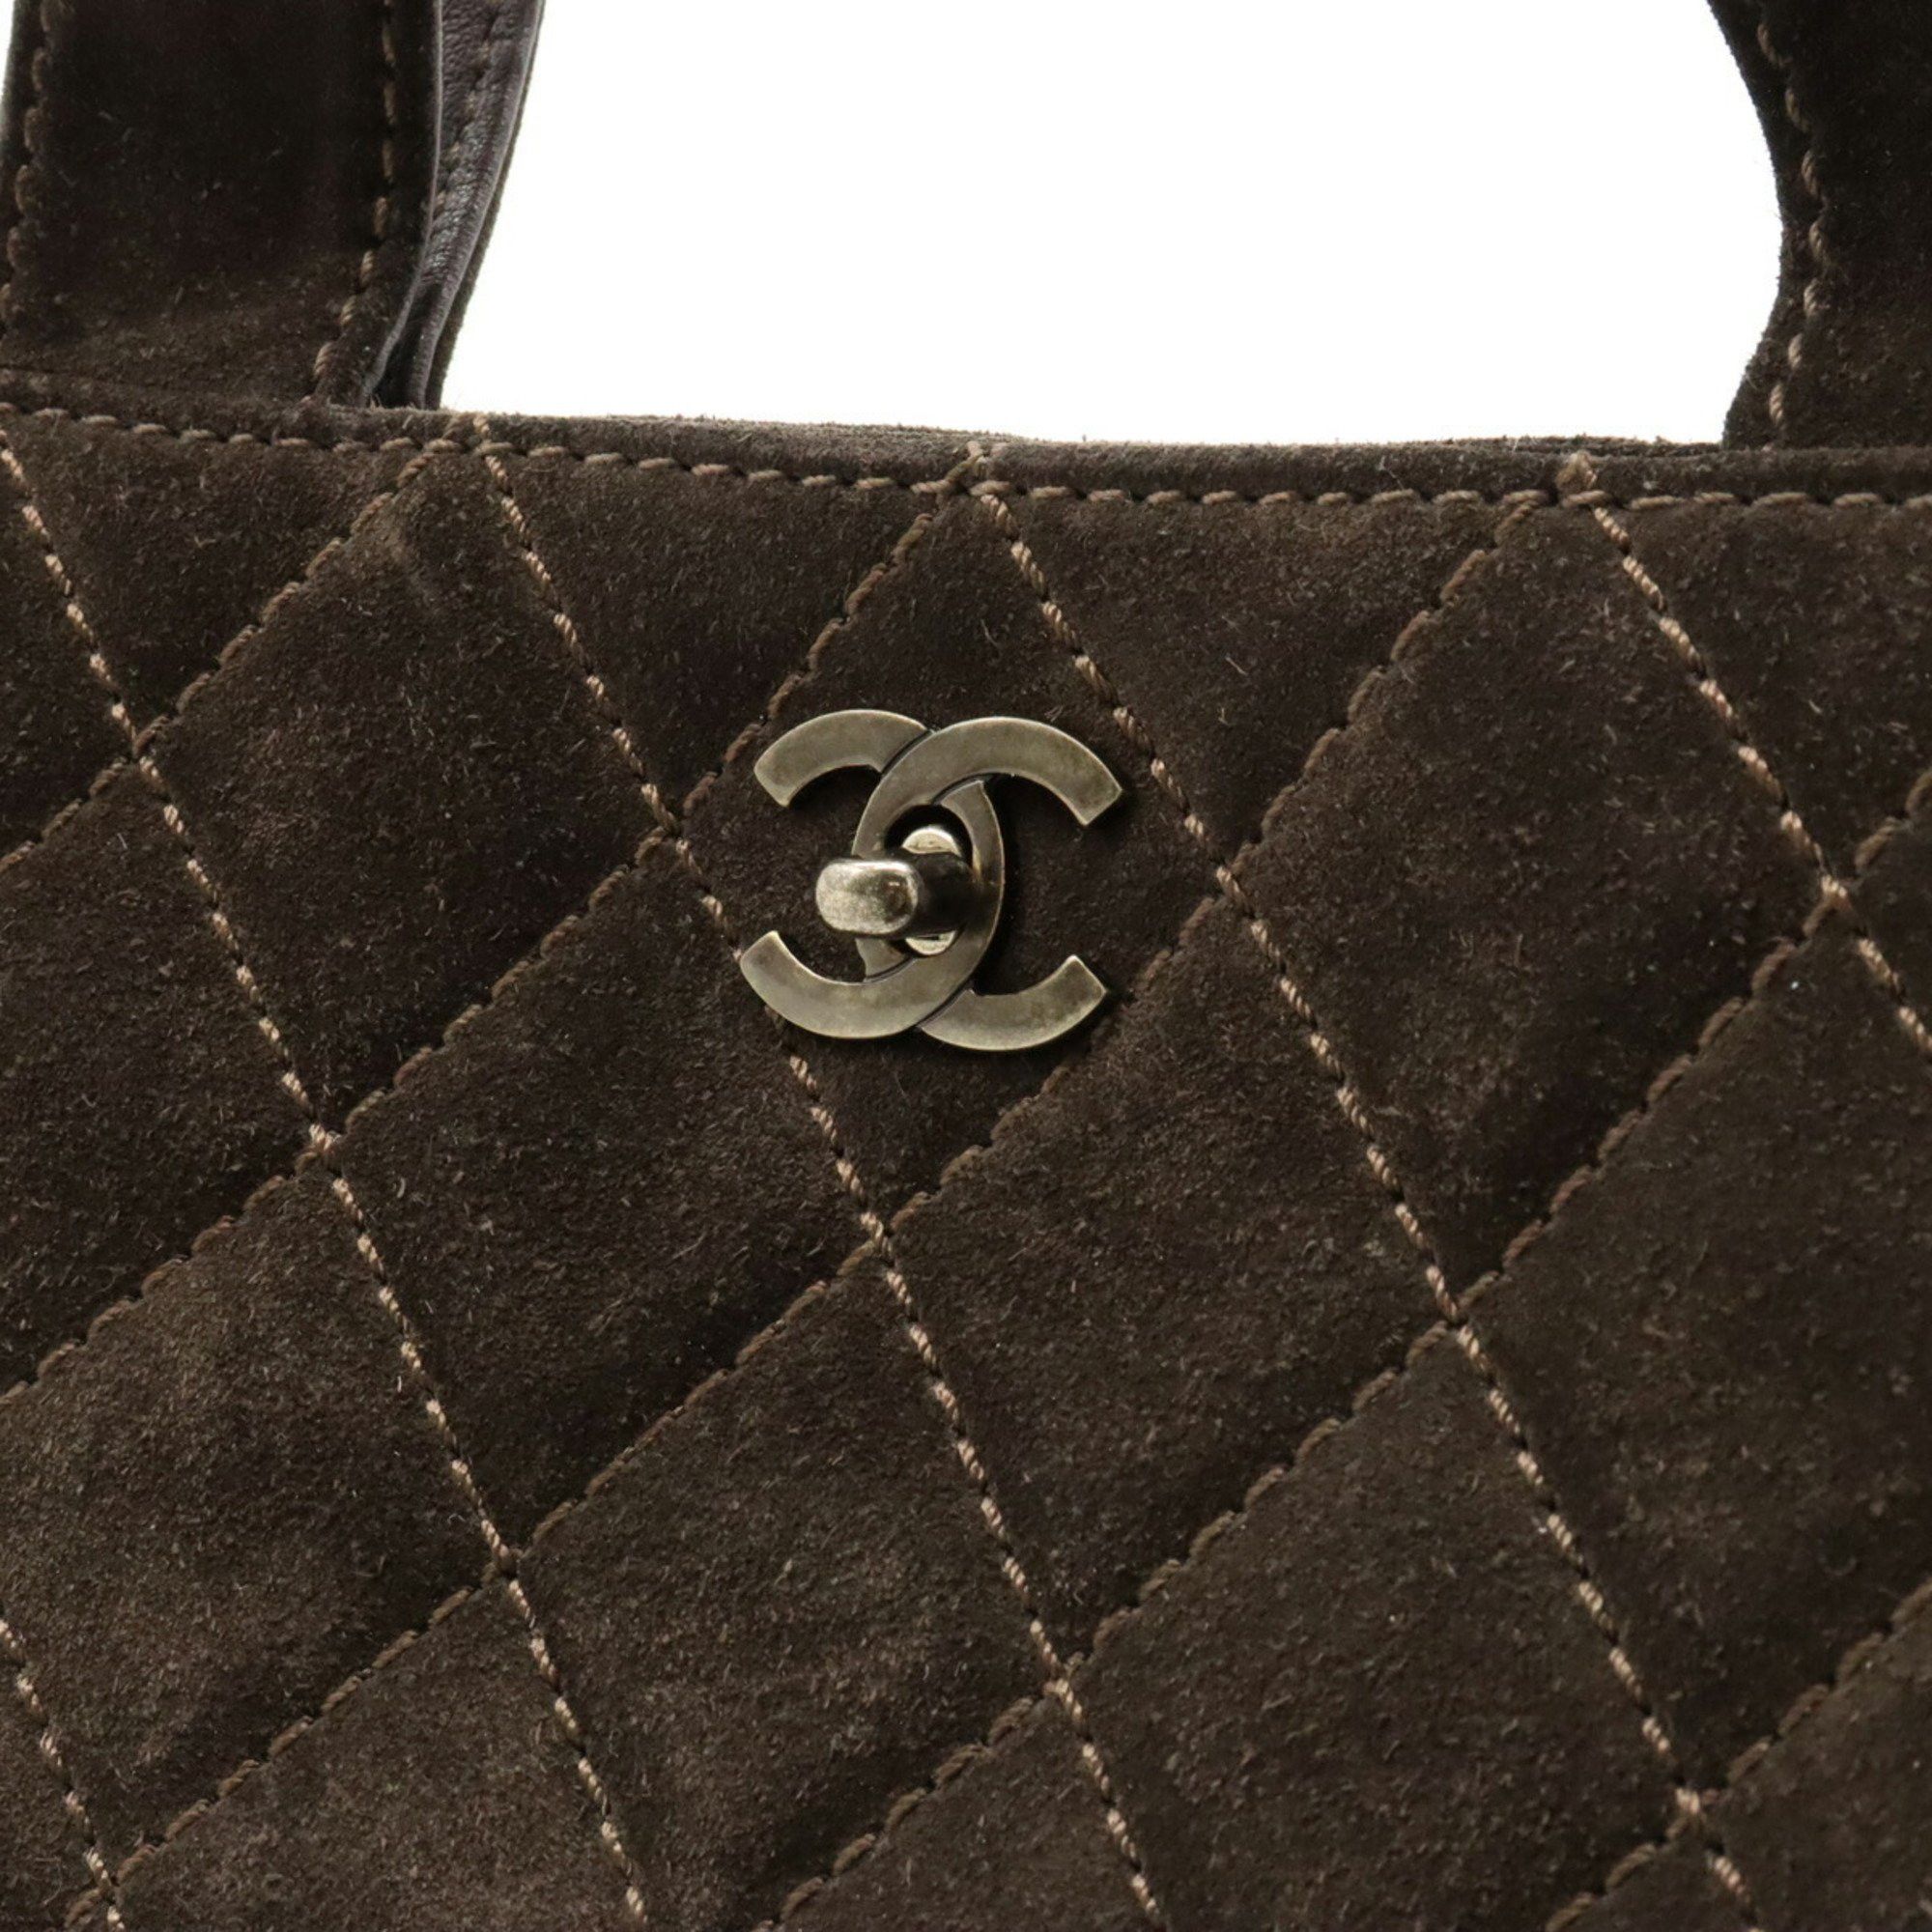 Chanel CHANEL Wild Stitch Matelasse Tote Bag Handbag Shoulder Suede Leather Dark Brown Size ONE SIZE - 8 Preview